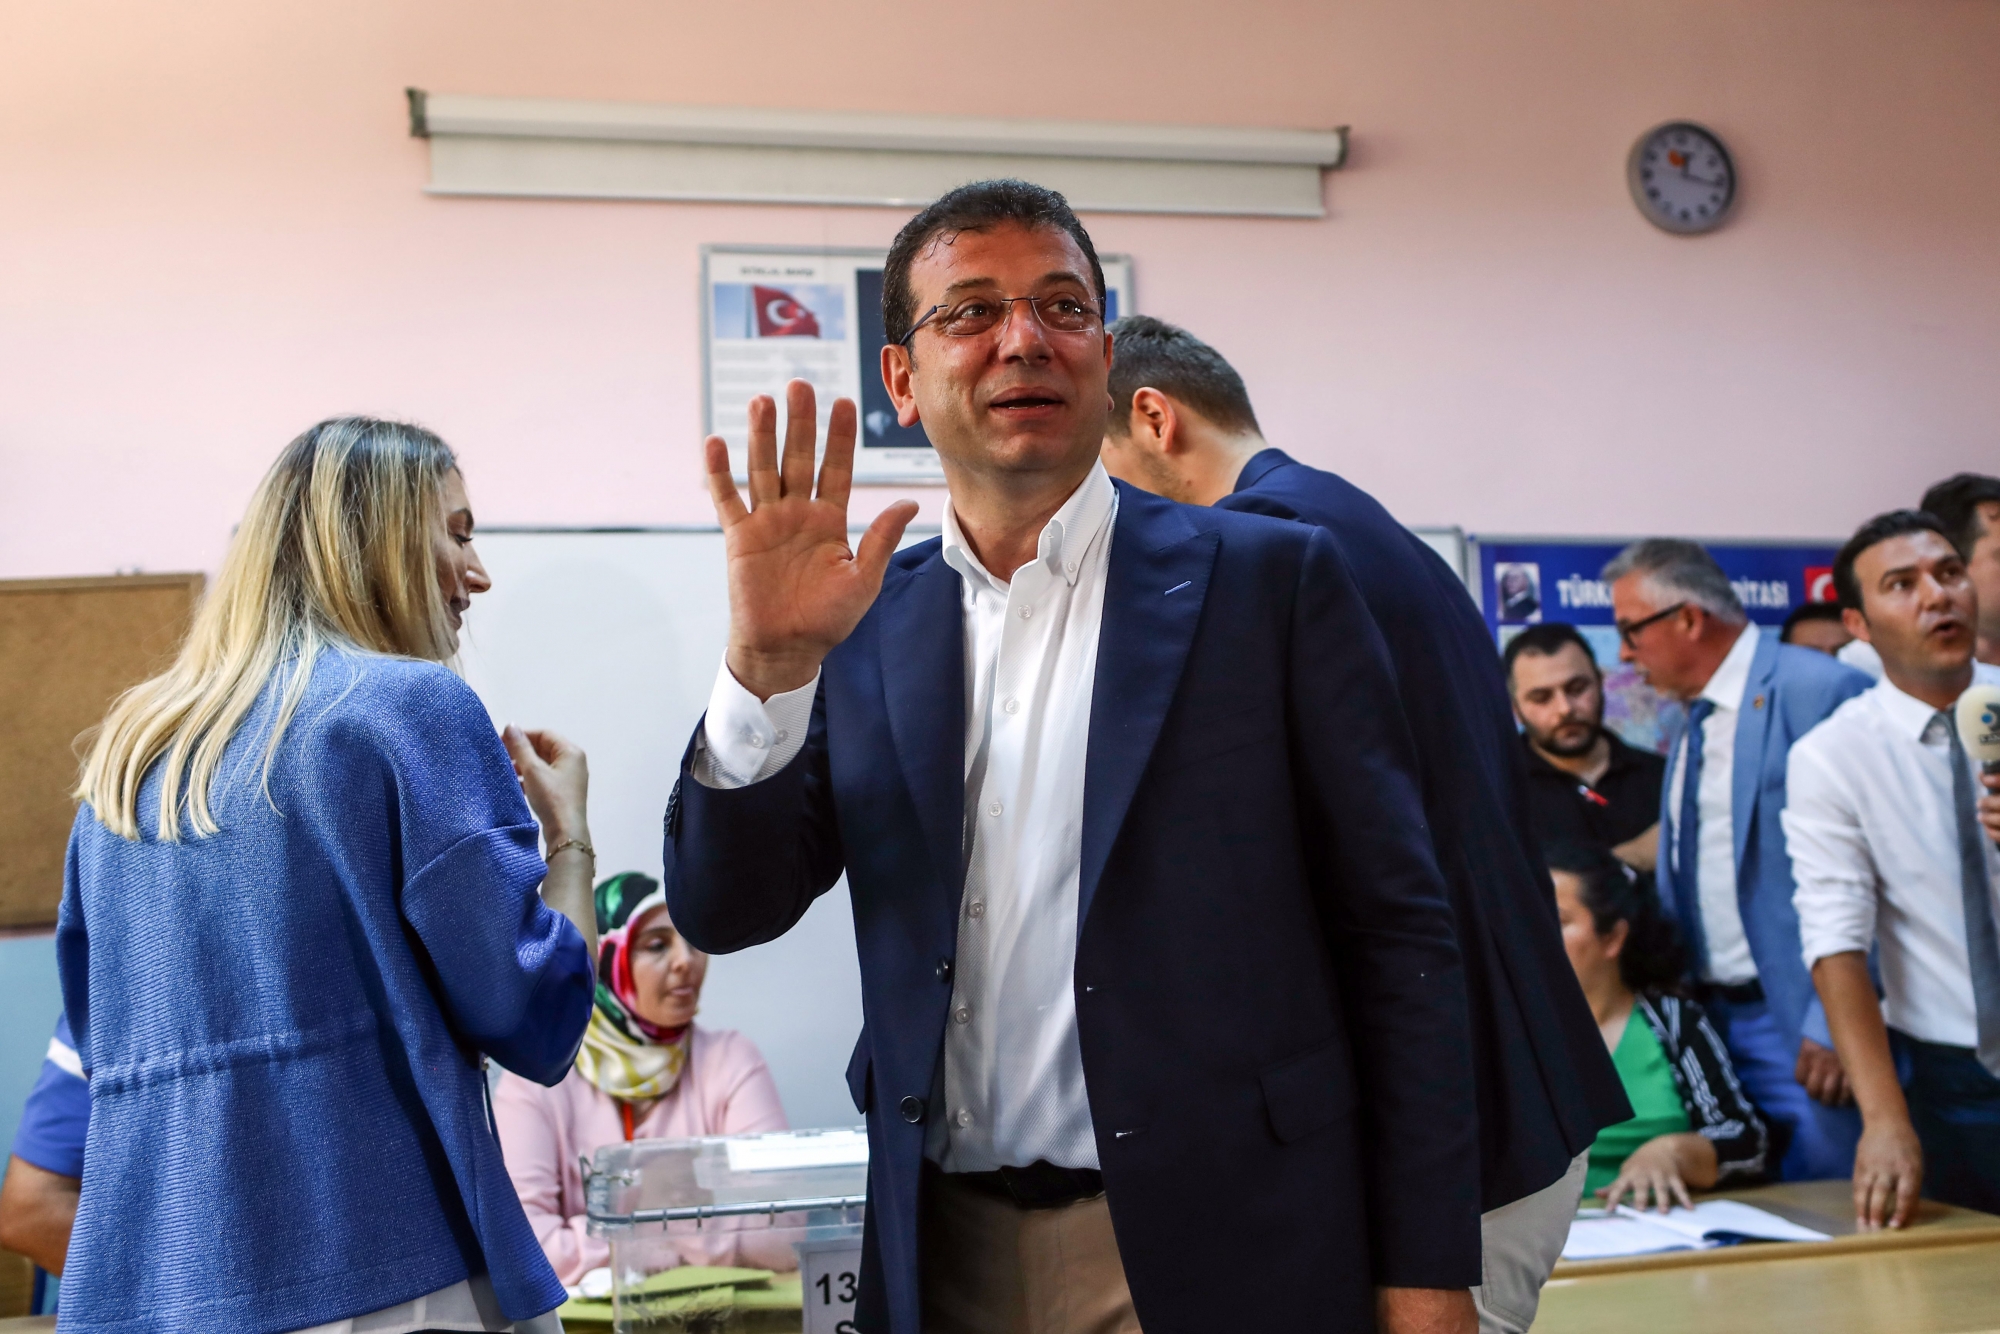 epa07667651 Republican People's Party 'CHP' candidate for Istanbul mayor Ekrem Imamoglu arrives to cast his vote in Istanbul mayor election re-run in Istanbul, Turkey, 23 June 2019. Some 10,5 million people will vote in repeat Istanbul mayor election.  According to media reports, the Turkish Electoral Commission has ordered a repeat of the mayoral election in Istanbul on 23 June, after Turkish President Recep Tayyip Erdogan's AK Party had alleged there was 'corruption' behind his party losing.  EPA/SEDAT SUNA TURKEY ISTANBUL MAYOR ELECTION